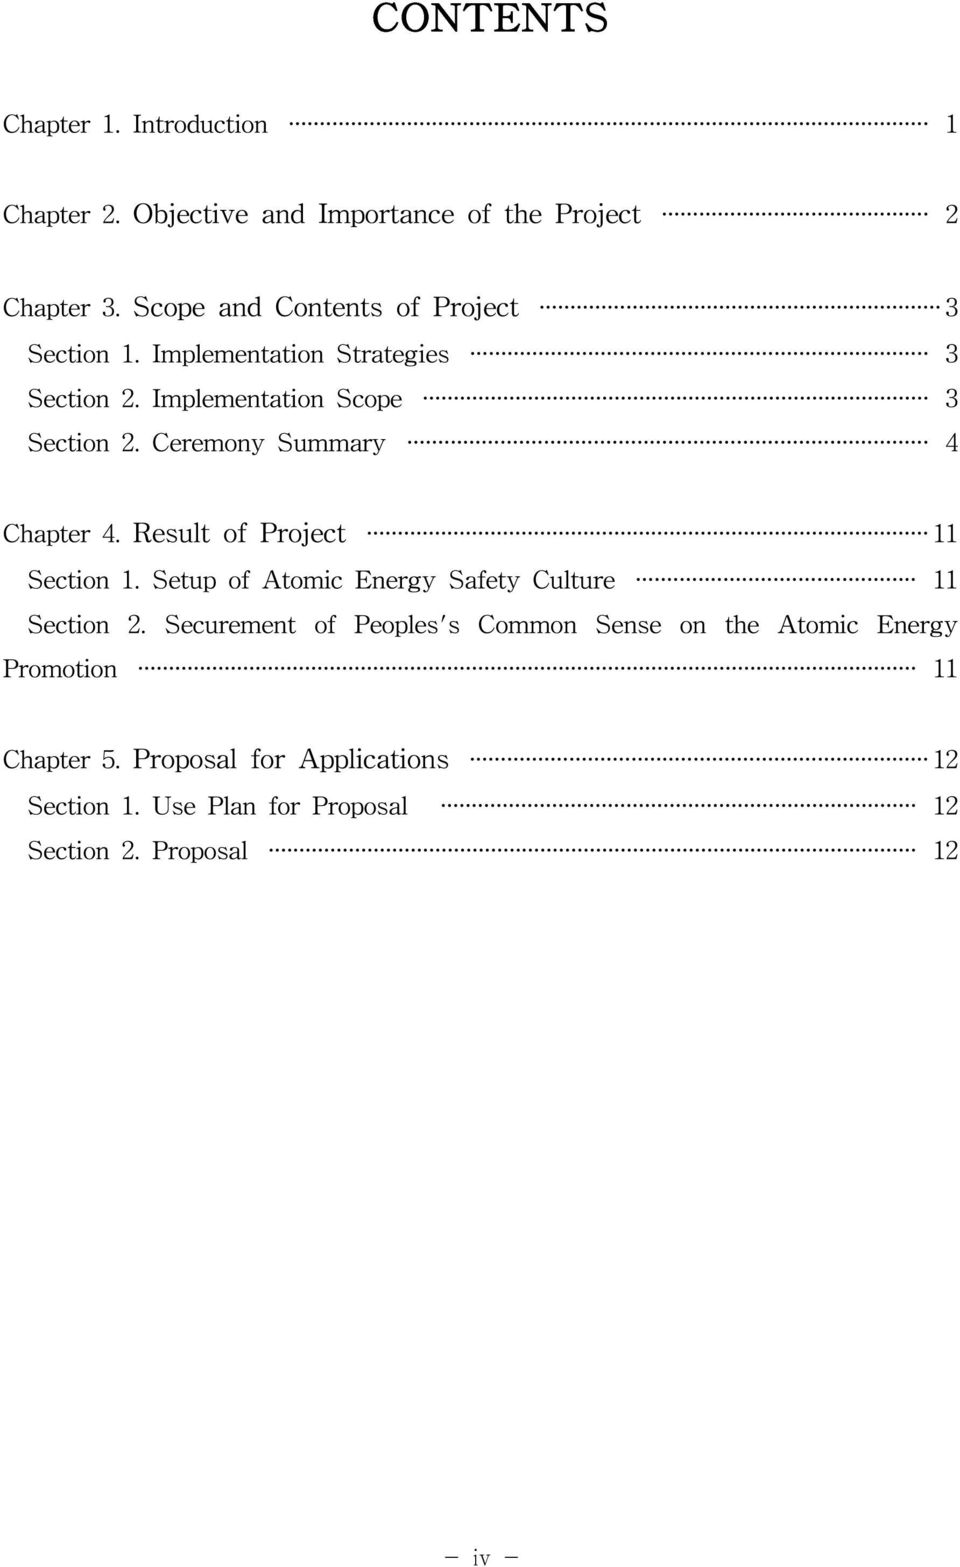 Ceremony Summary 4 Chapter 4. Result of Project 11 Section 1. Setup of Atomic Energy Safety Culture 11 Section 2.